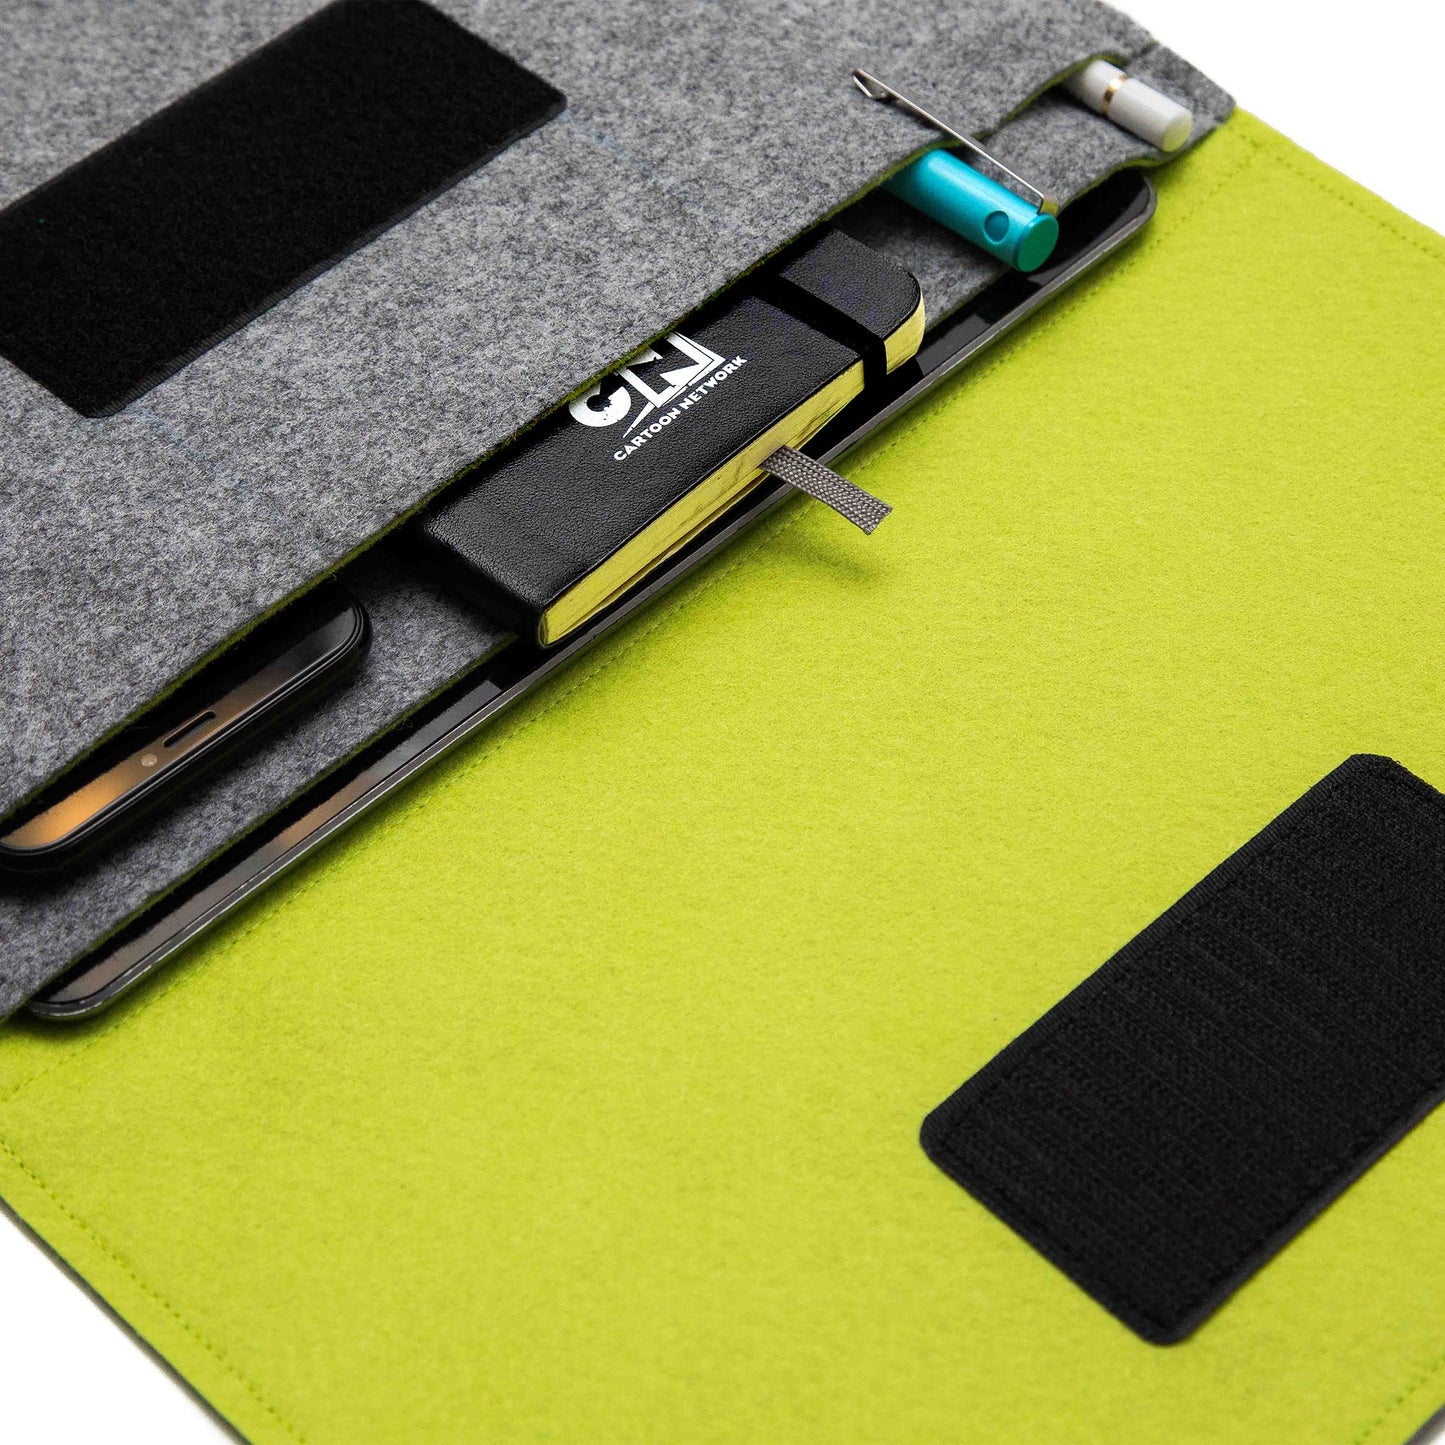 Premium Felt iPad Cover: Ultimate Protection with Accessories Pocket - Grey & Lime